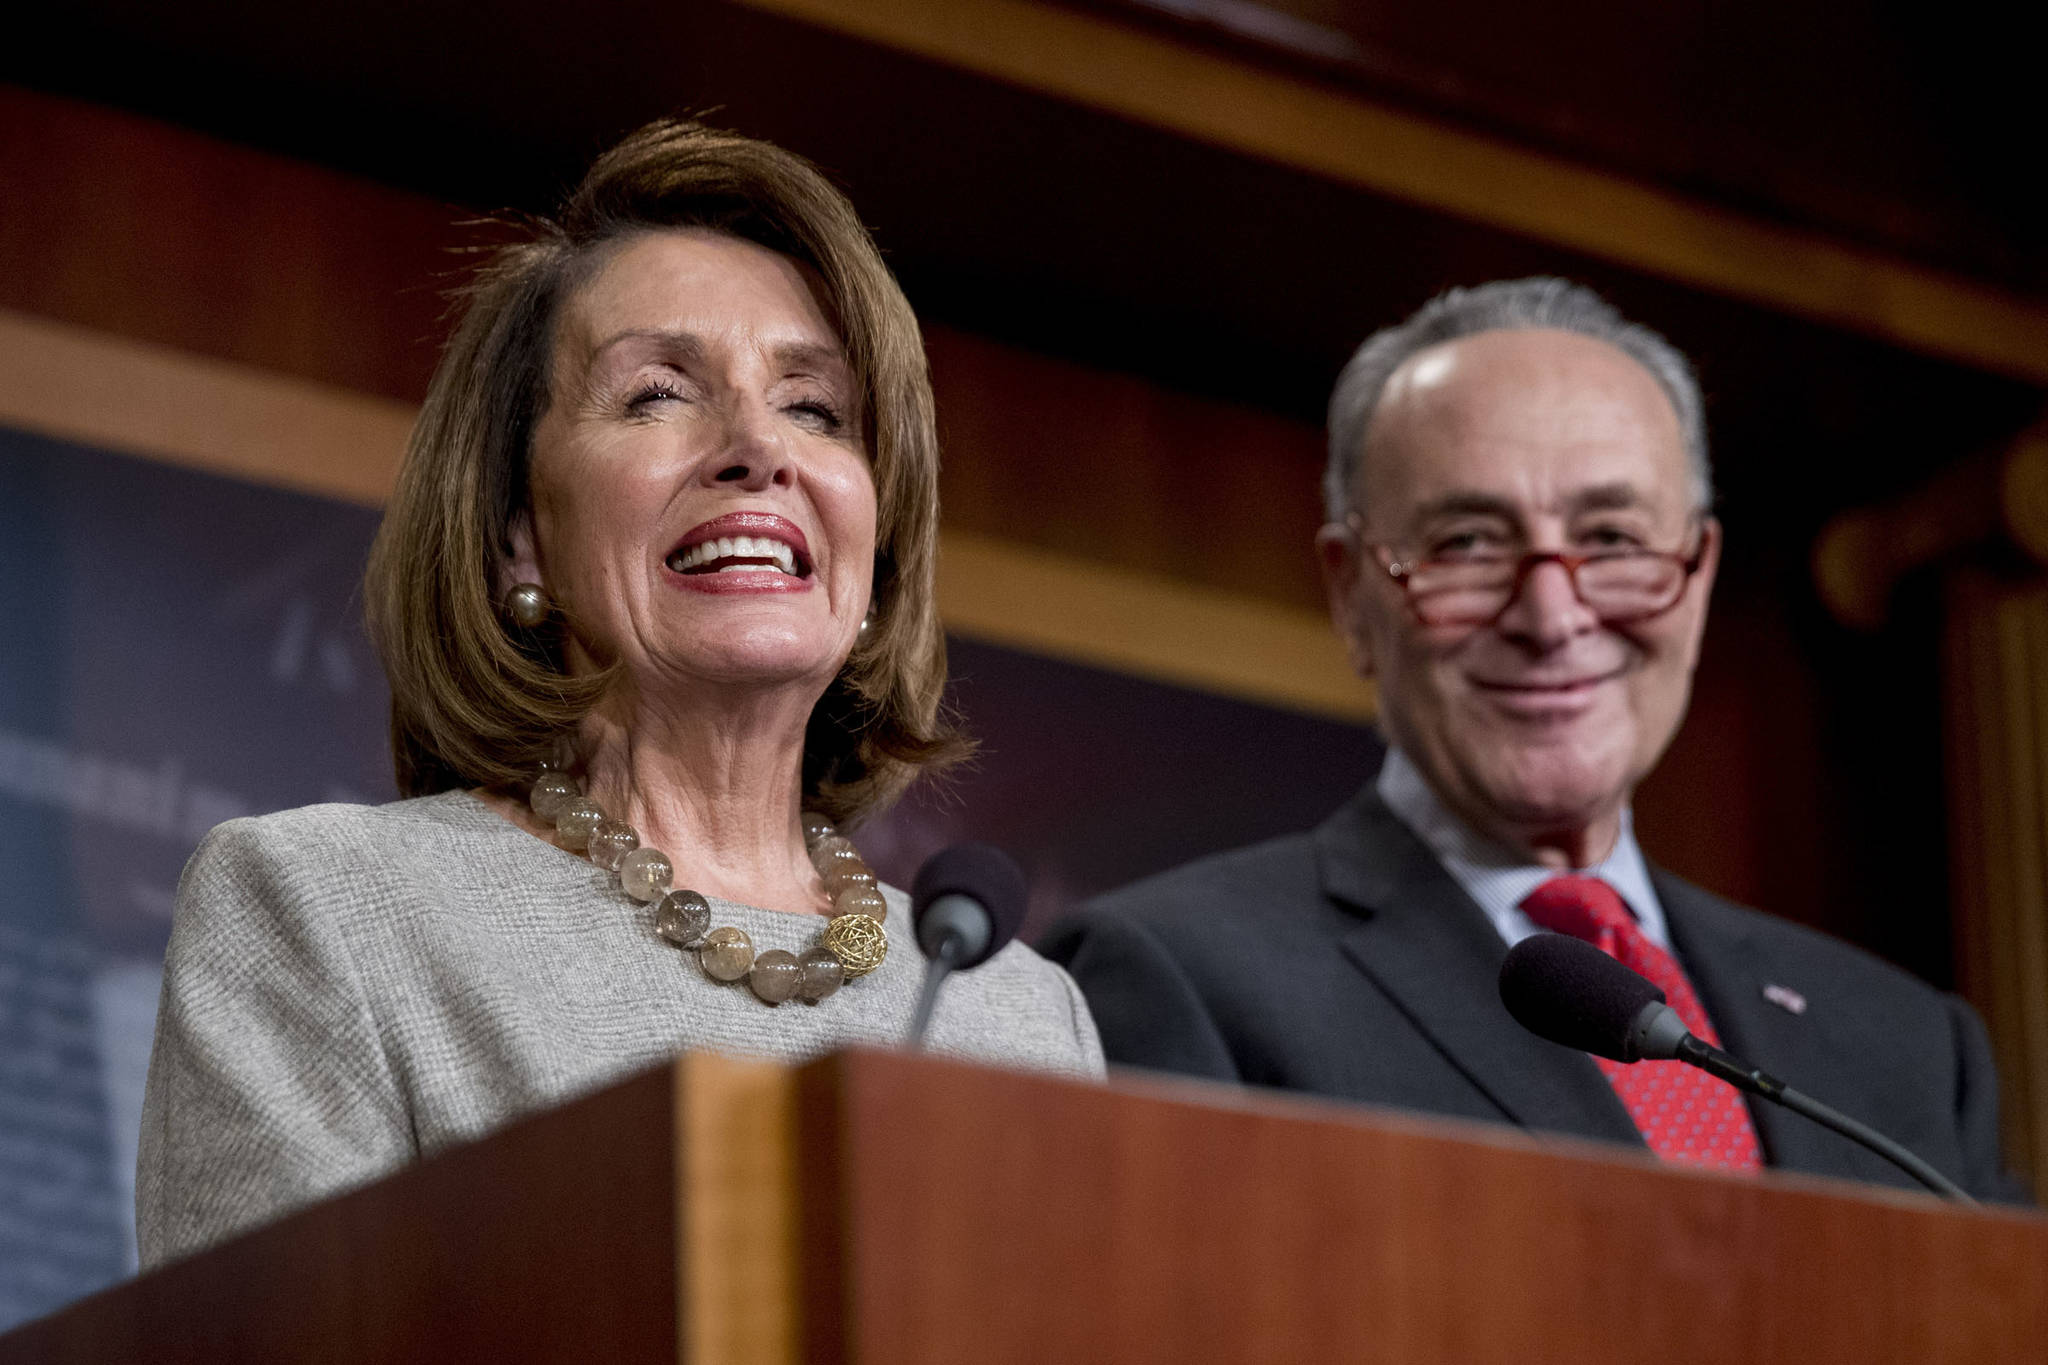 House Speaker Nancy Pelosi of Calif., and Senate Minority Leader Sen. Chuck Schumer of N.Y., smile during a news conference on Capitol Hill in Washington, Friday, Jan. 25, 2019, after President Donald Trump announces a deal to reopen the government for three weeks. (Andrew Harnik | Associated Press)